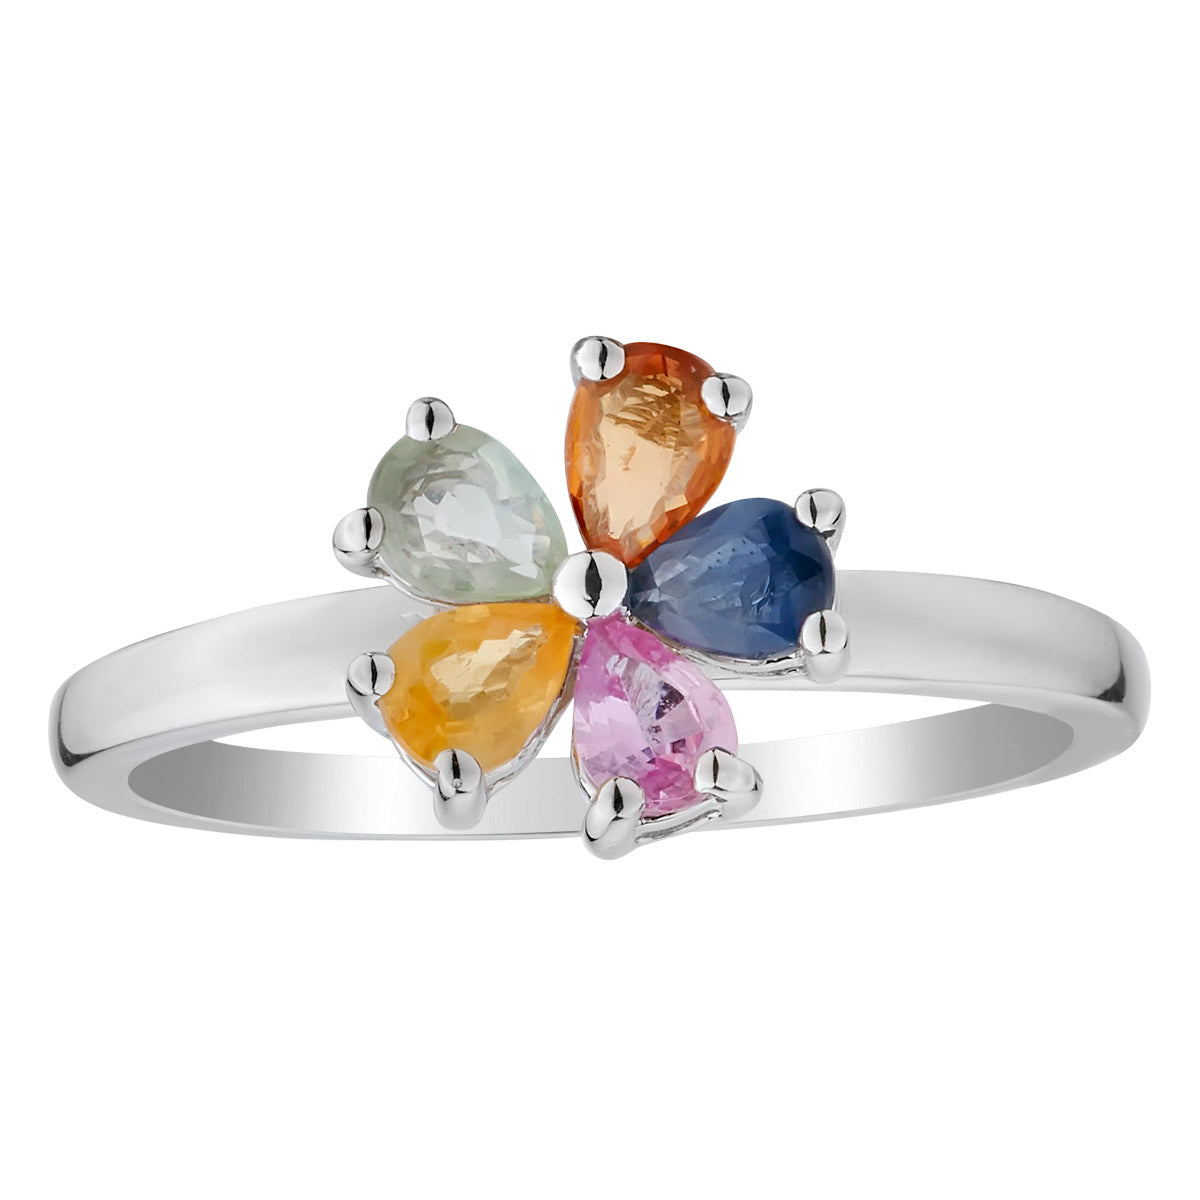 .75 Carat Genuine Multi-Colour Sapphire Flower Ring,  Sterling Silver. Gemstone Rings. Griffin Jewellery Designs